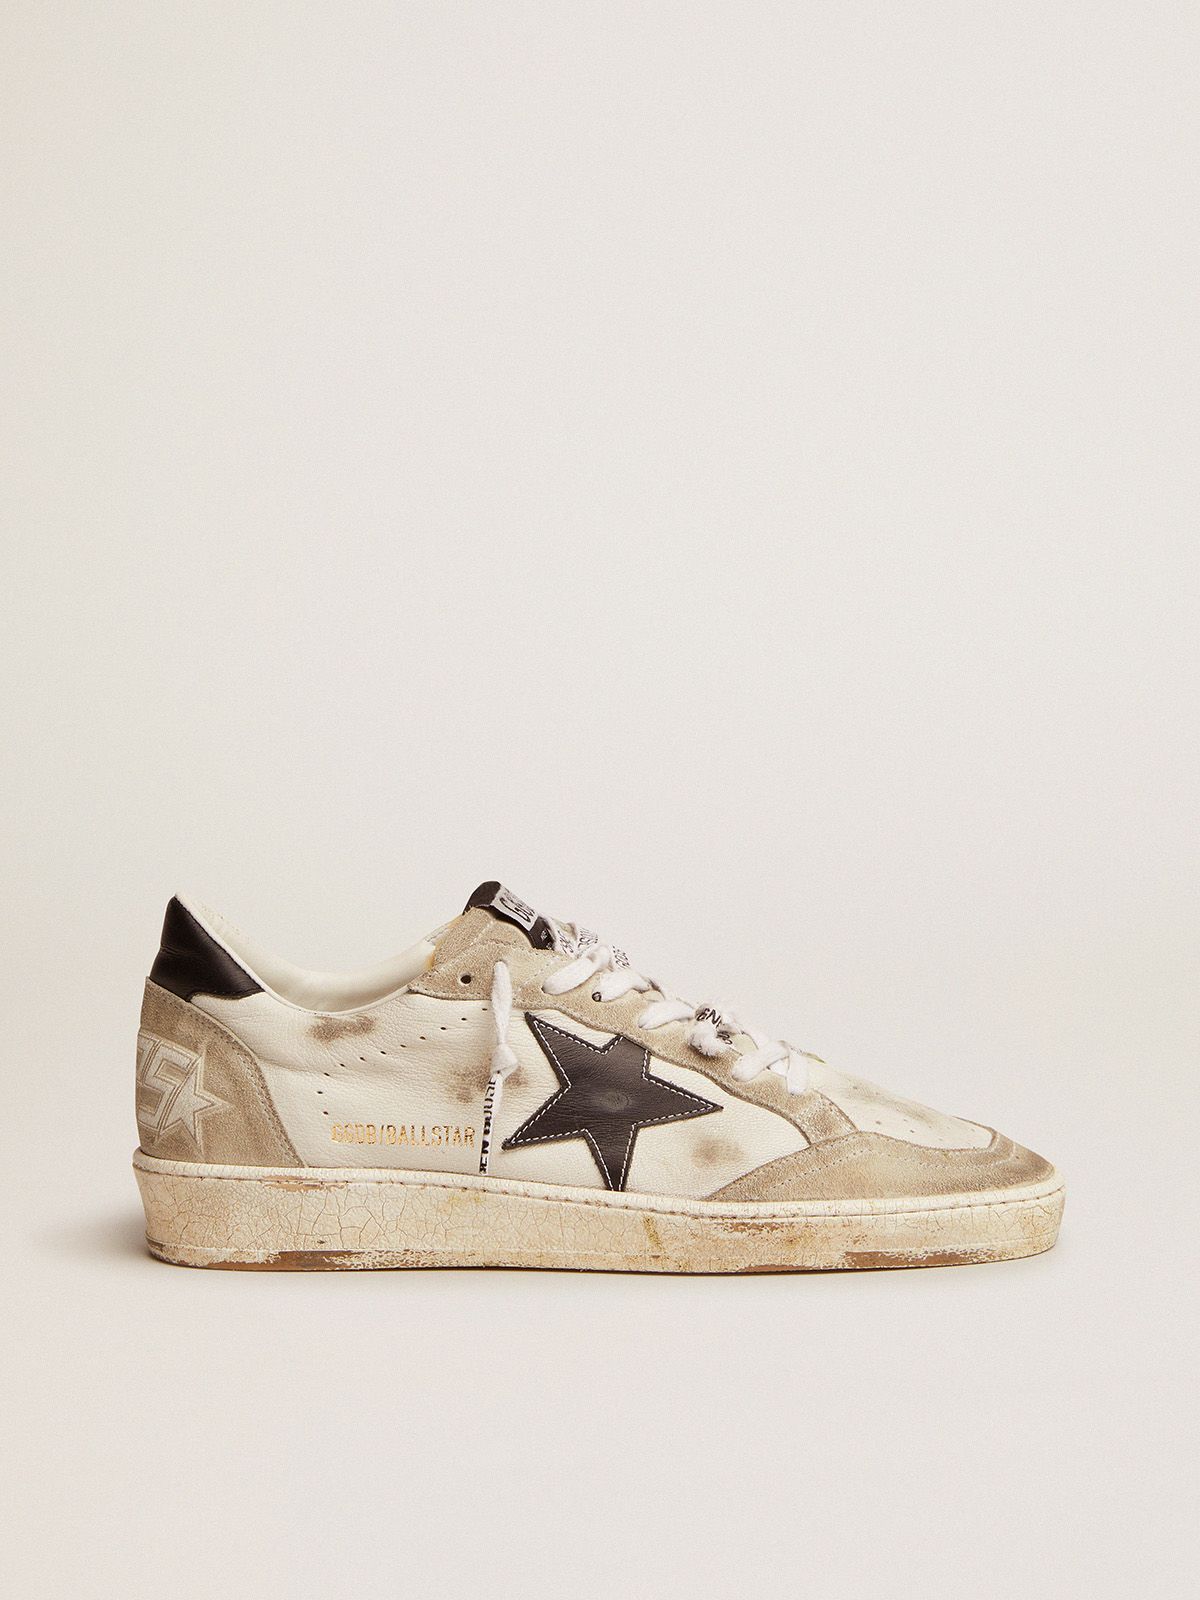 Ball Star sneakers in white leather and ice-gray suede with black leather  detail